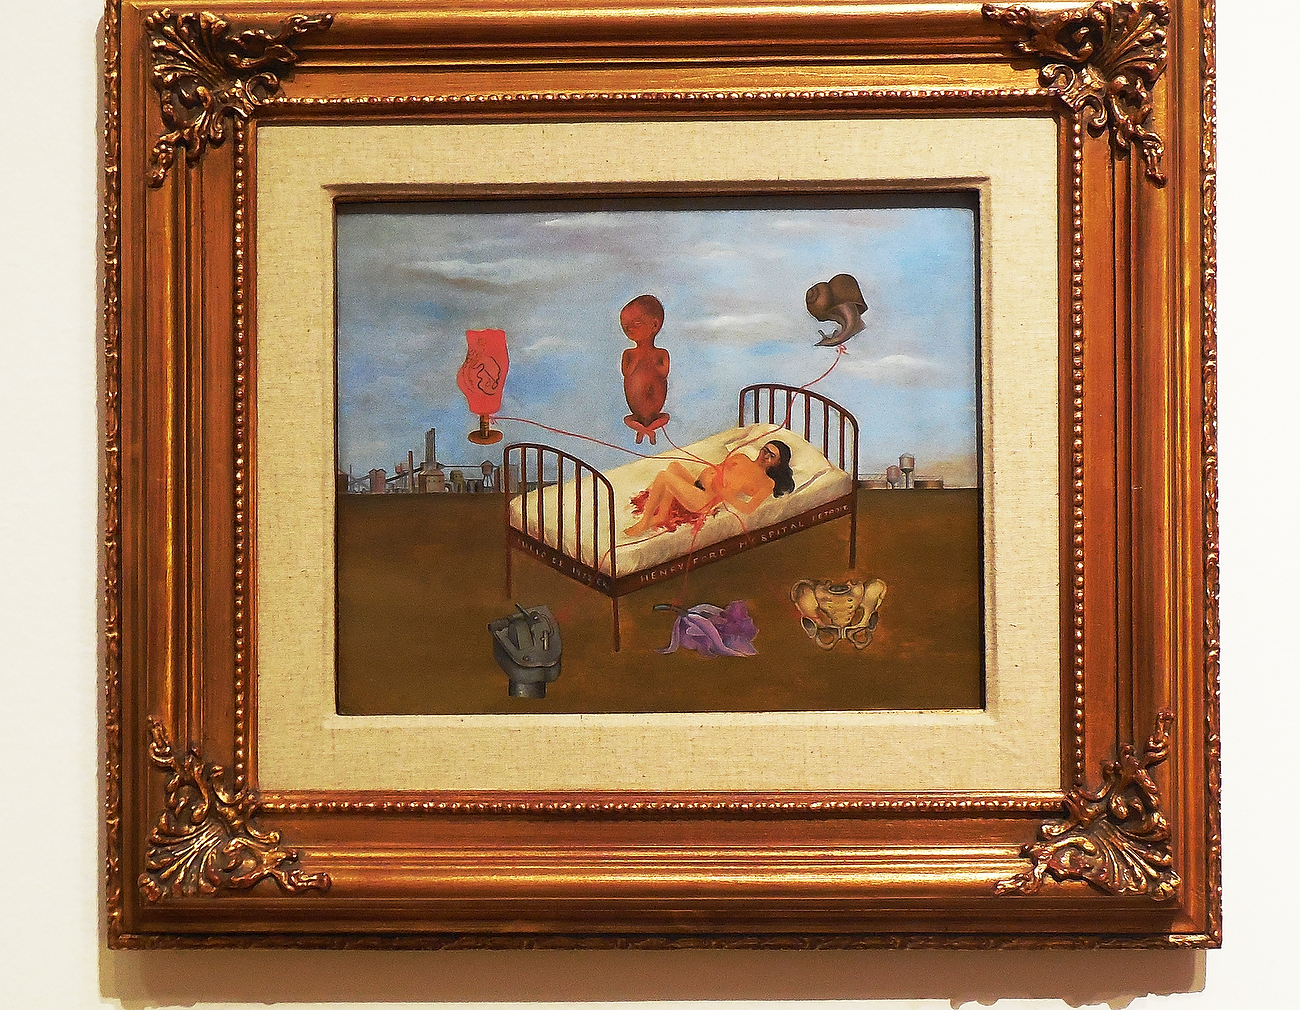 Frida kahlo henry ford hospital painting meaning #6